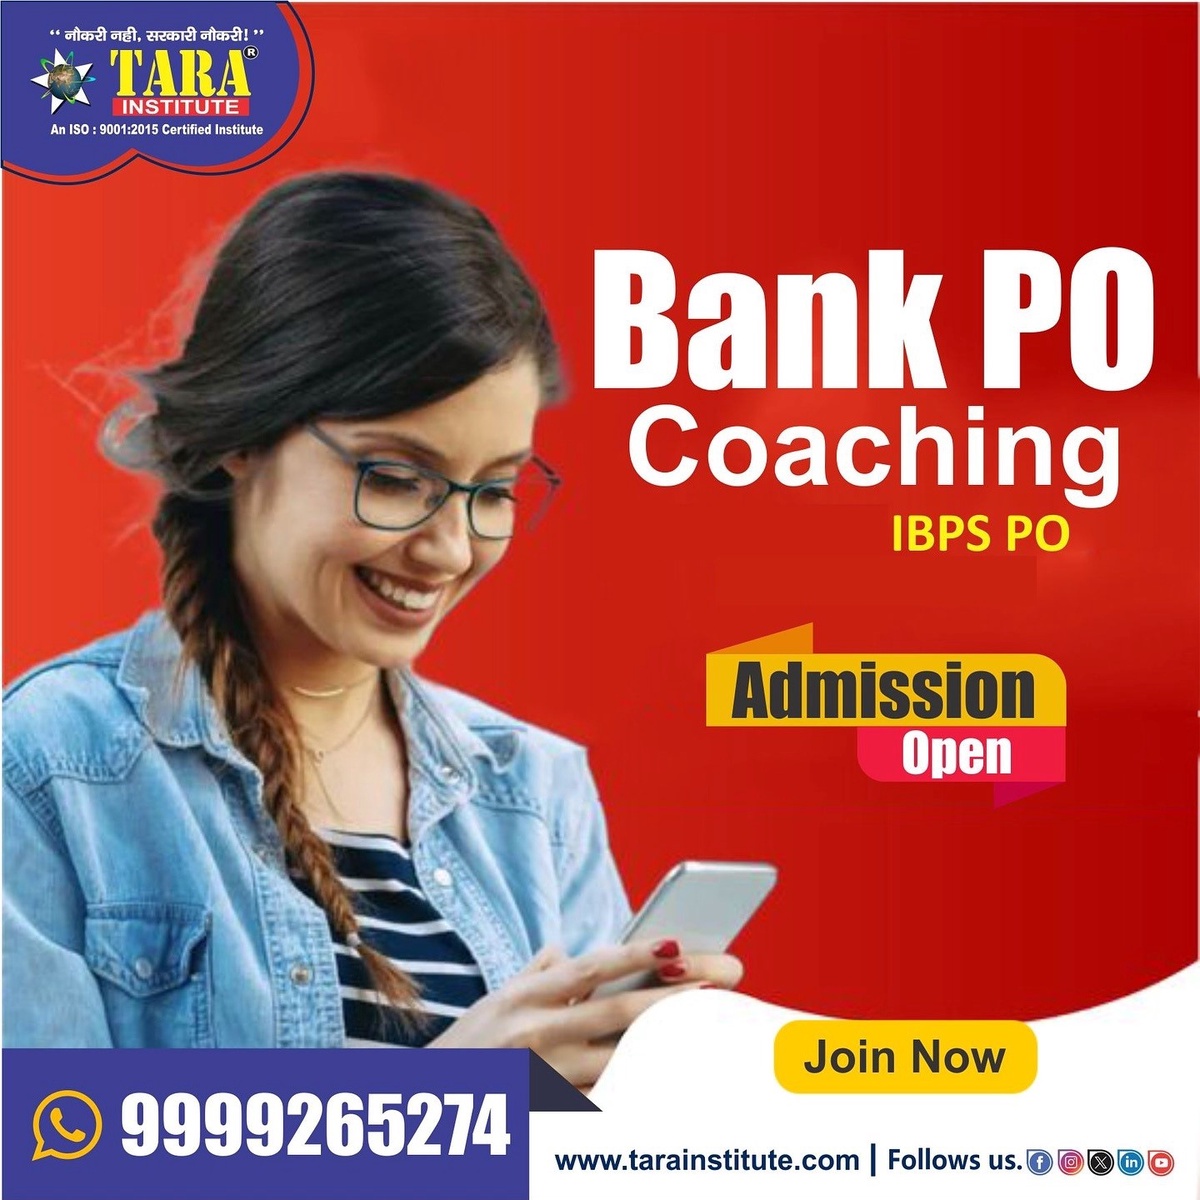 The Top 7 Strategies for Acing IBPS PO Coaching in Delhi